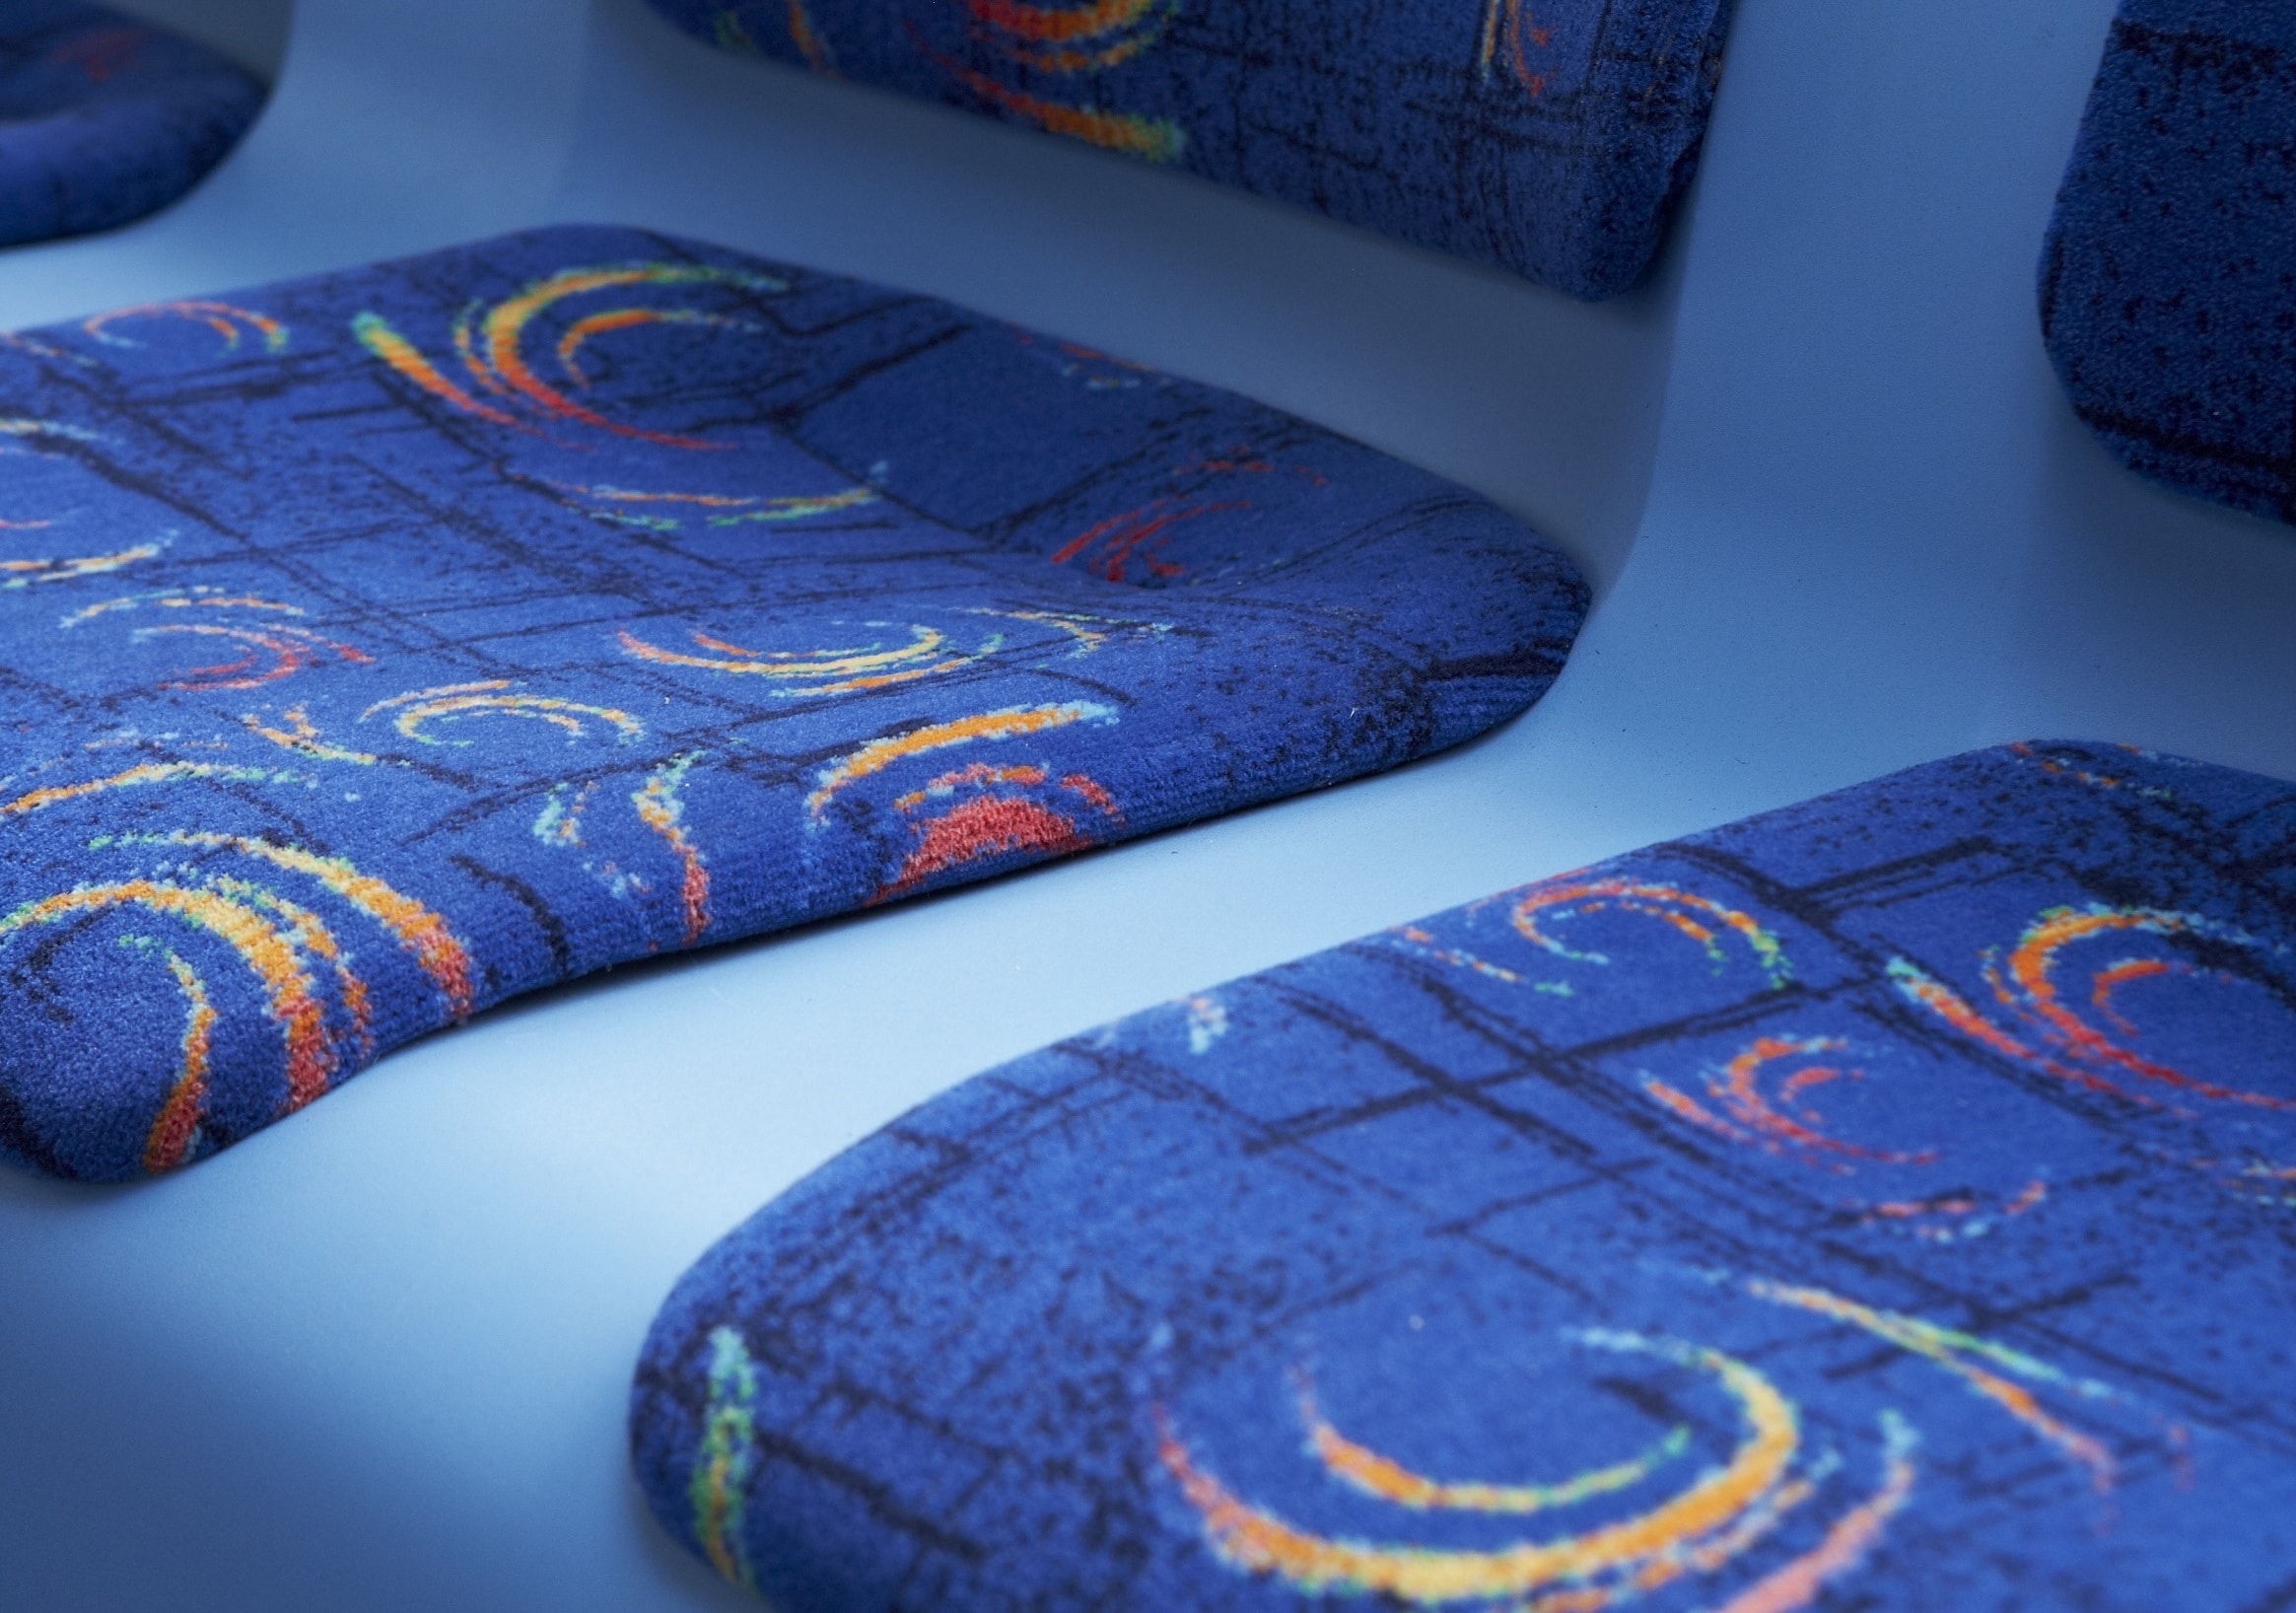 Camira launches StaySafe for its seat fabrics